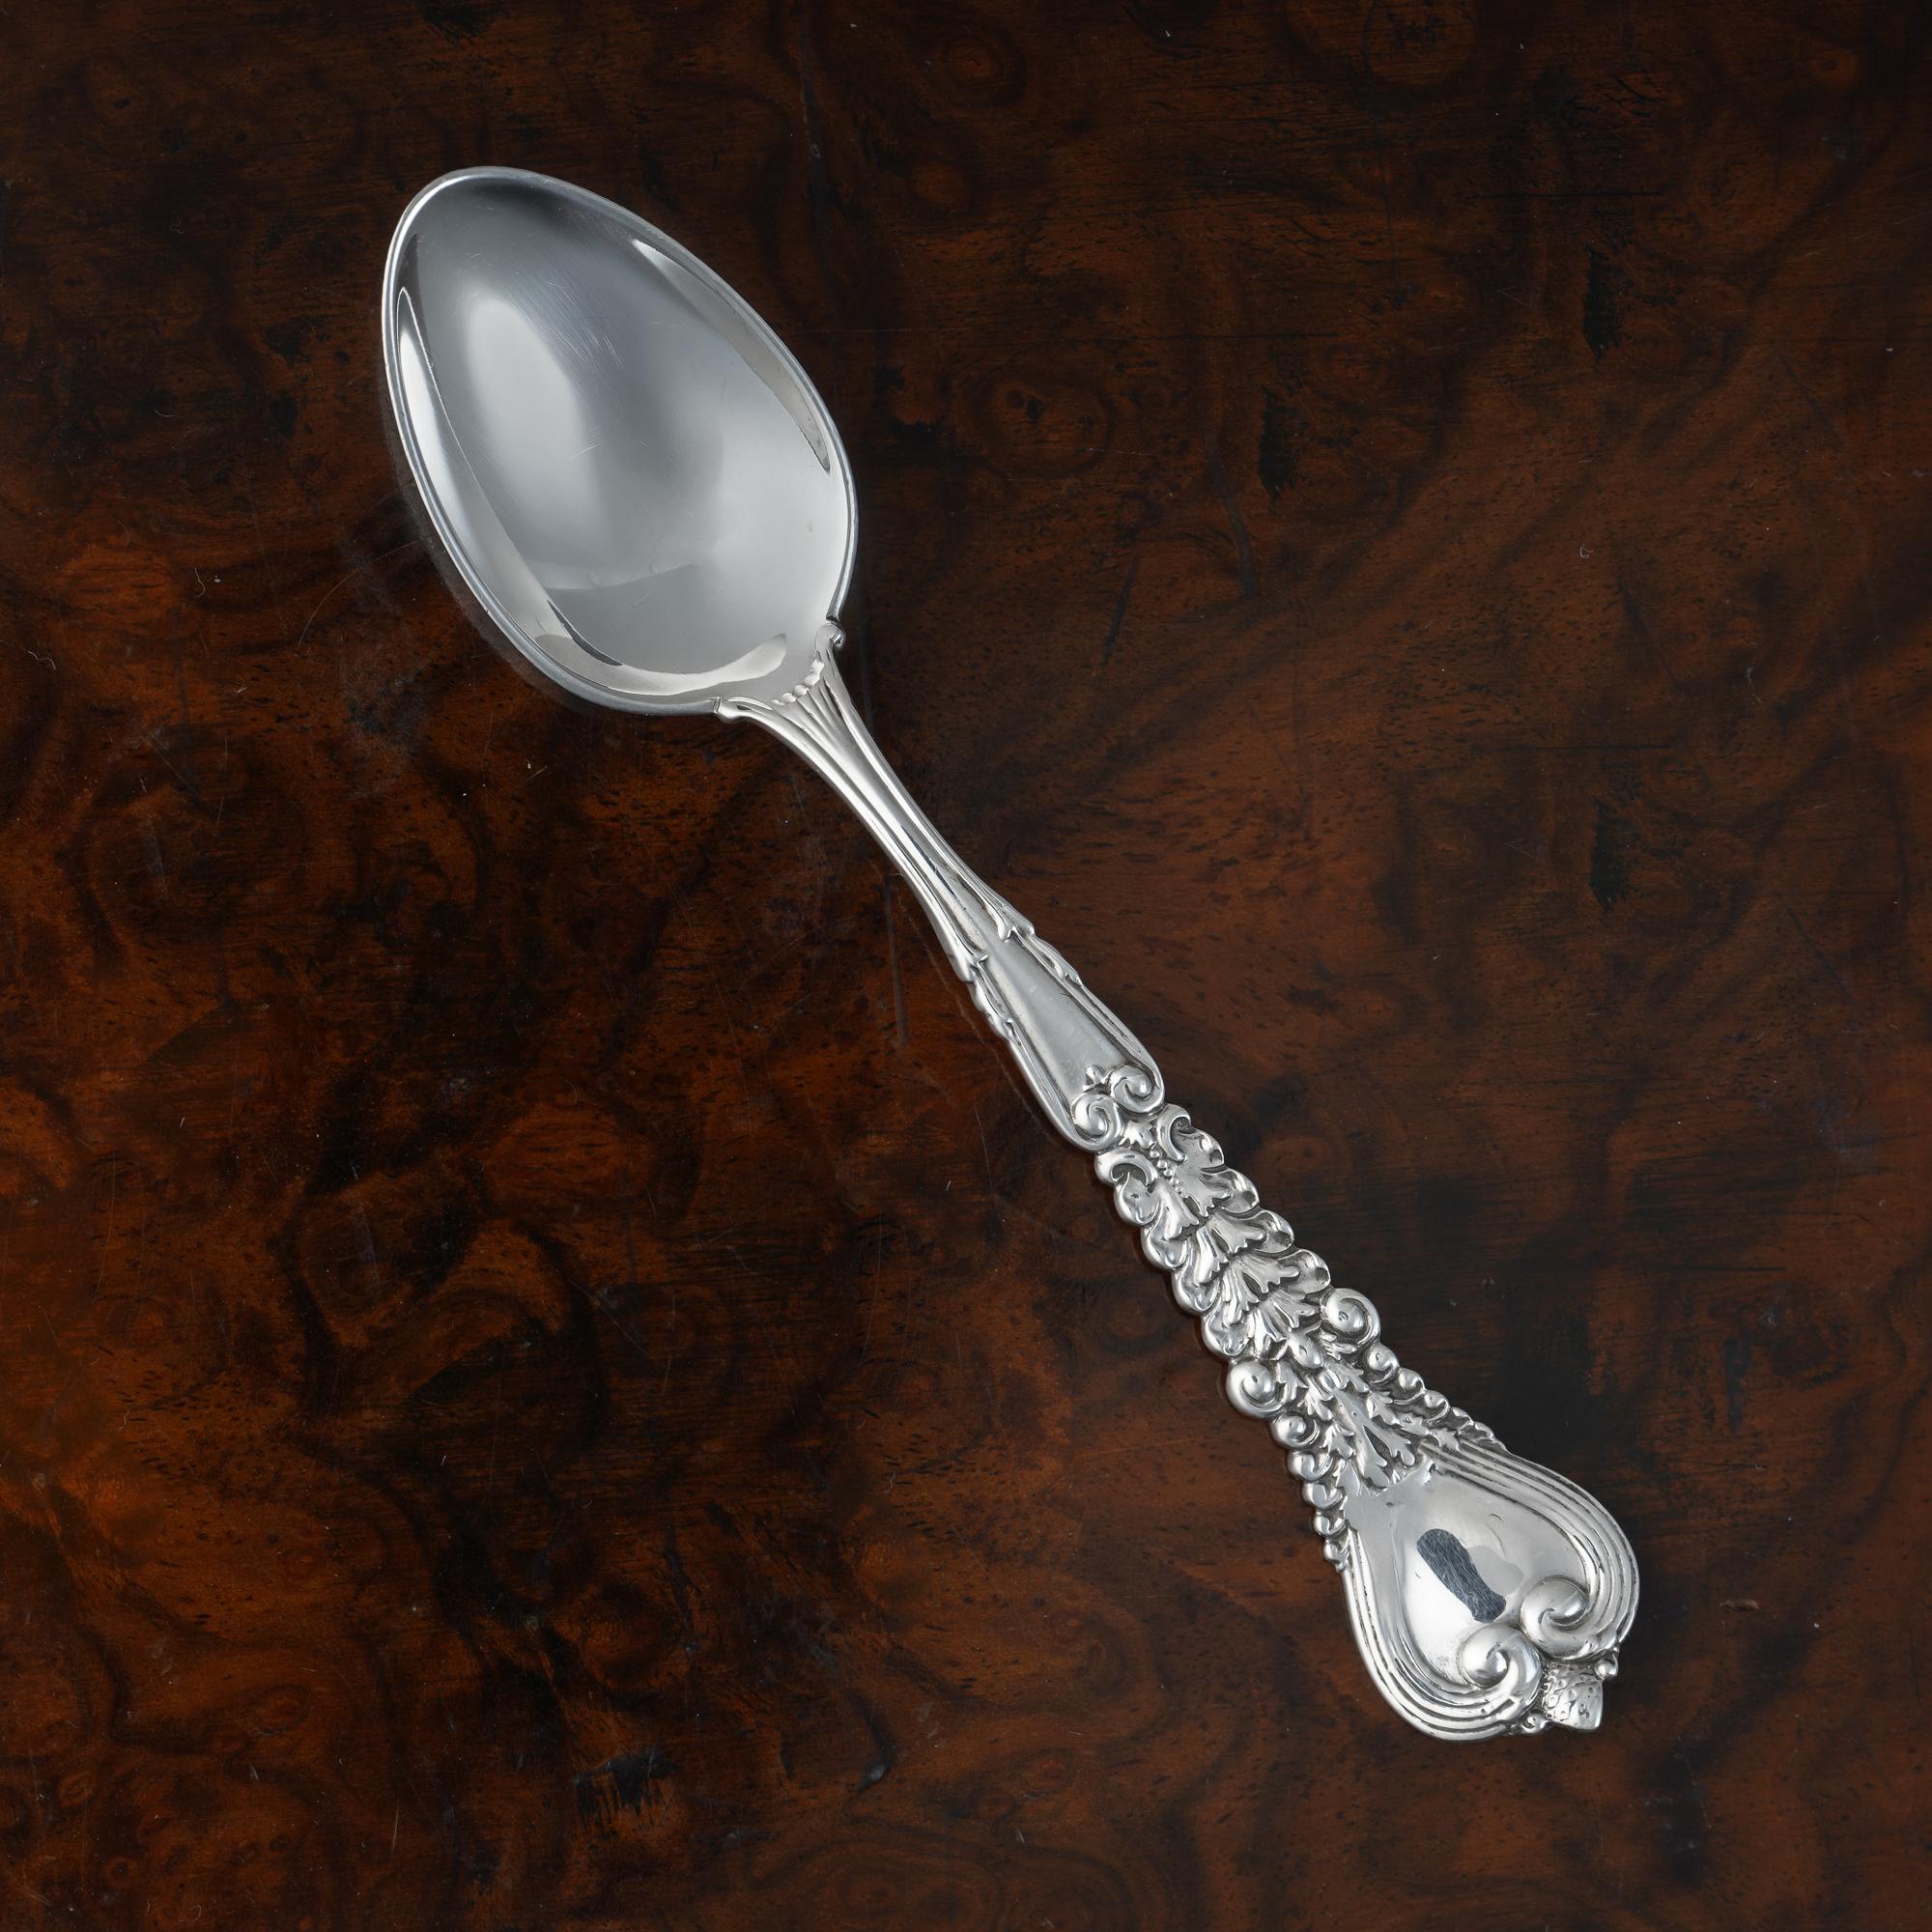 American Antique Tiffany & Co. Sterling Silver Florentine Pattern Demitasse Spoon For Sale